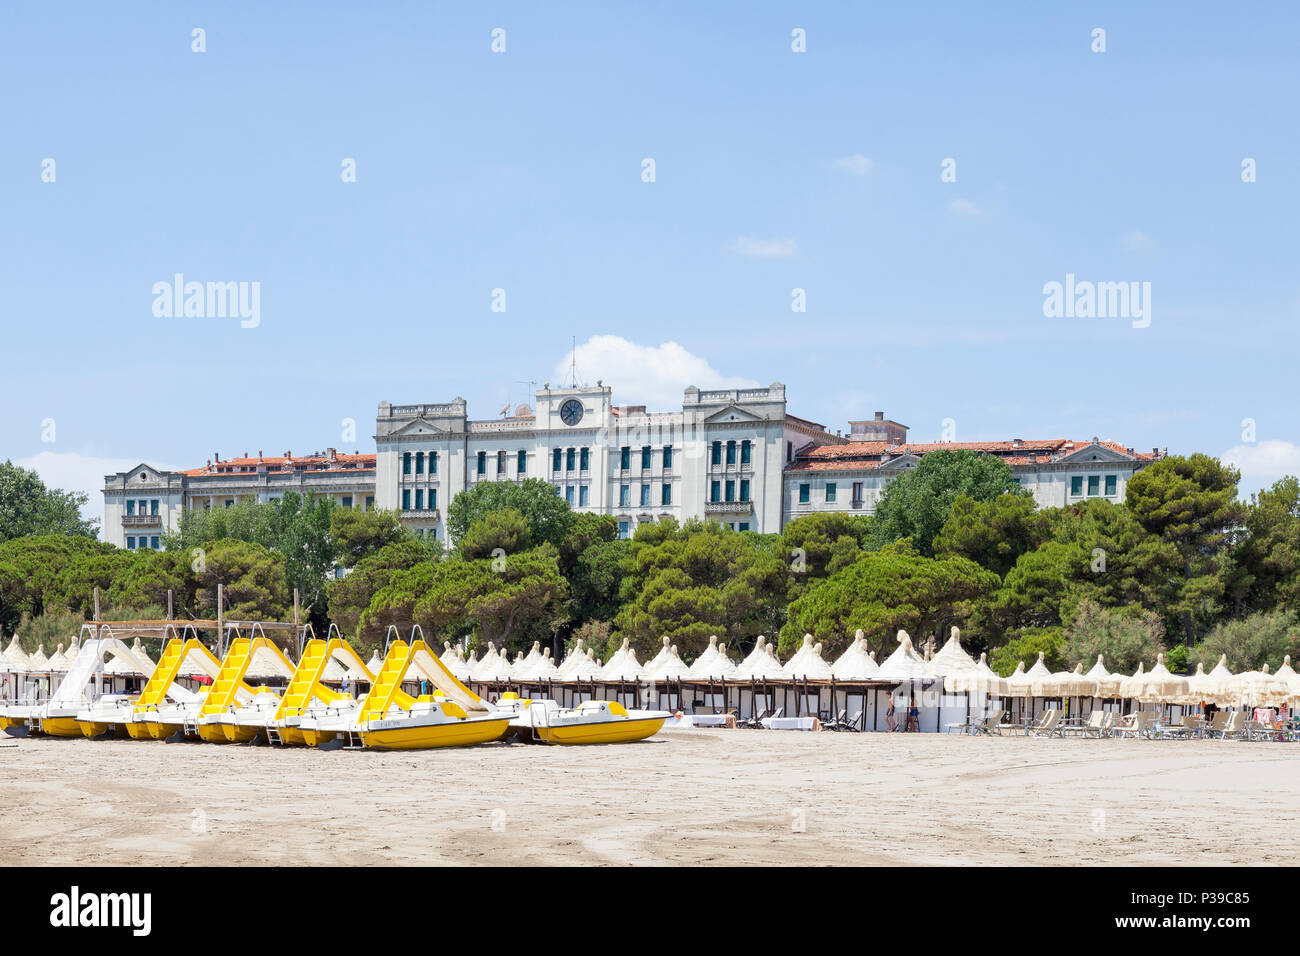 Colourful yellow recreational boats for hire and cabanas on a private beach on Lido di Venezia, Venice, Veneto, Italy with the ex Grand Hotel les Bain Stock Photo